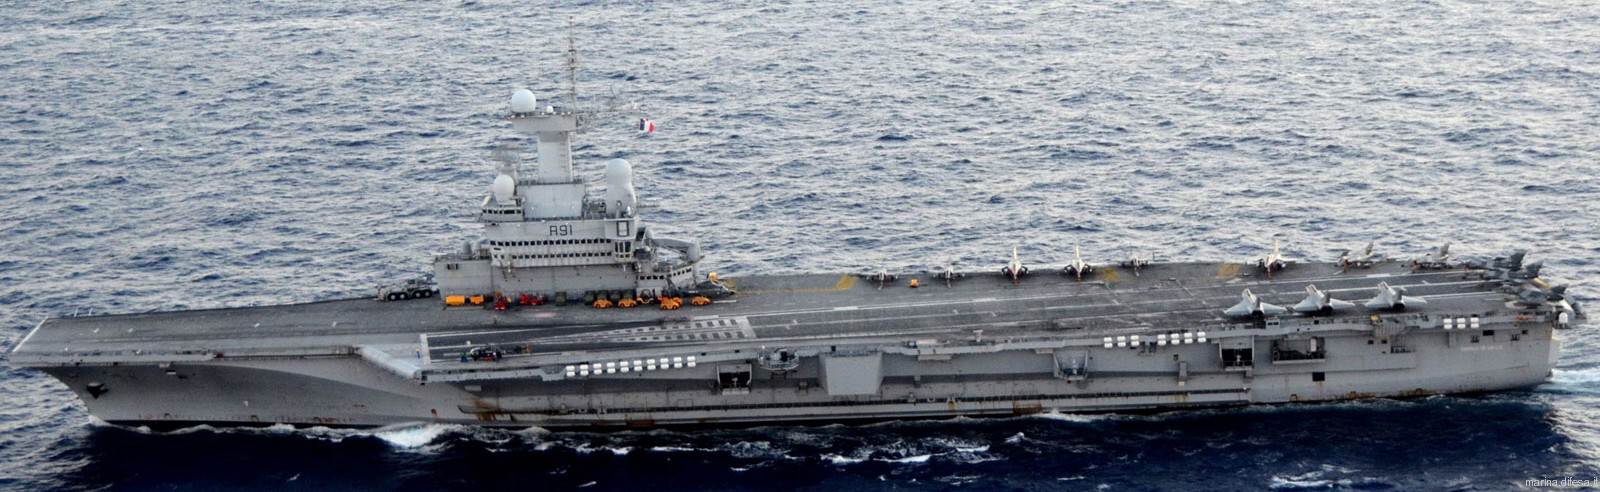  r-91 fs charles de gaulle aircraft carrier french navy 56